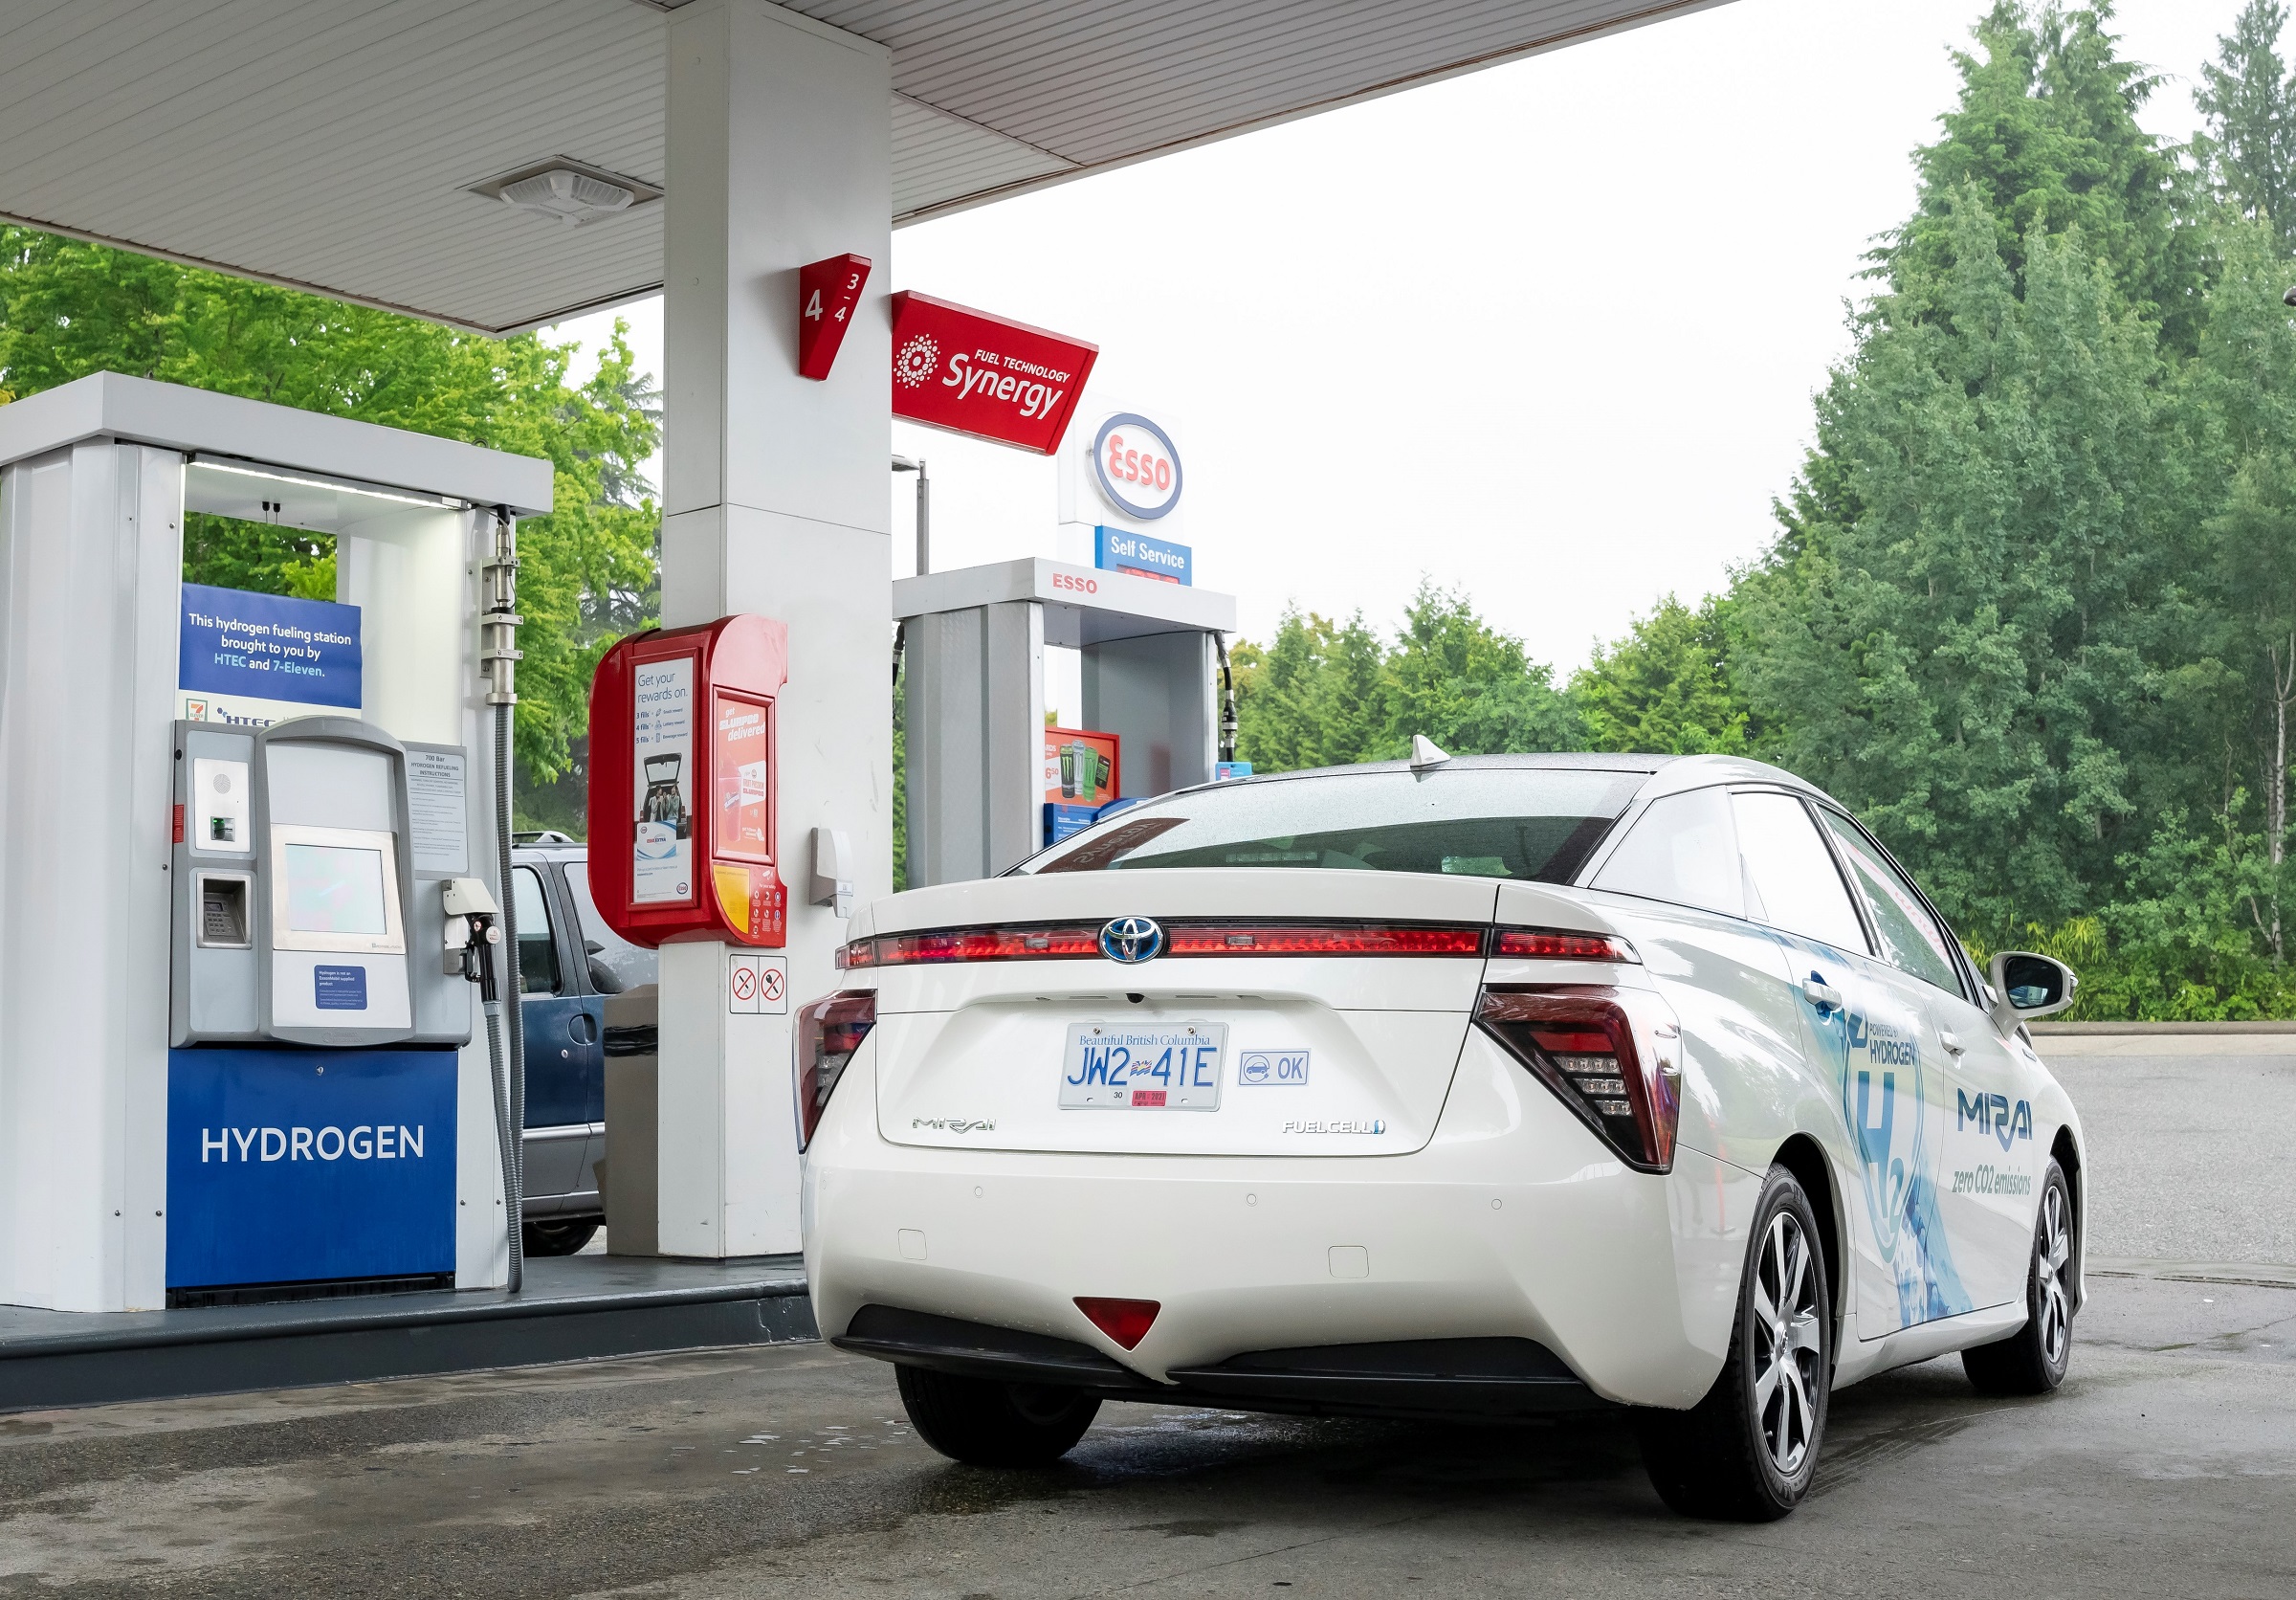 Fuel Cell Electric Vehicle